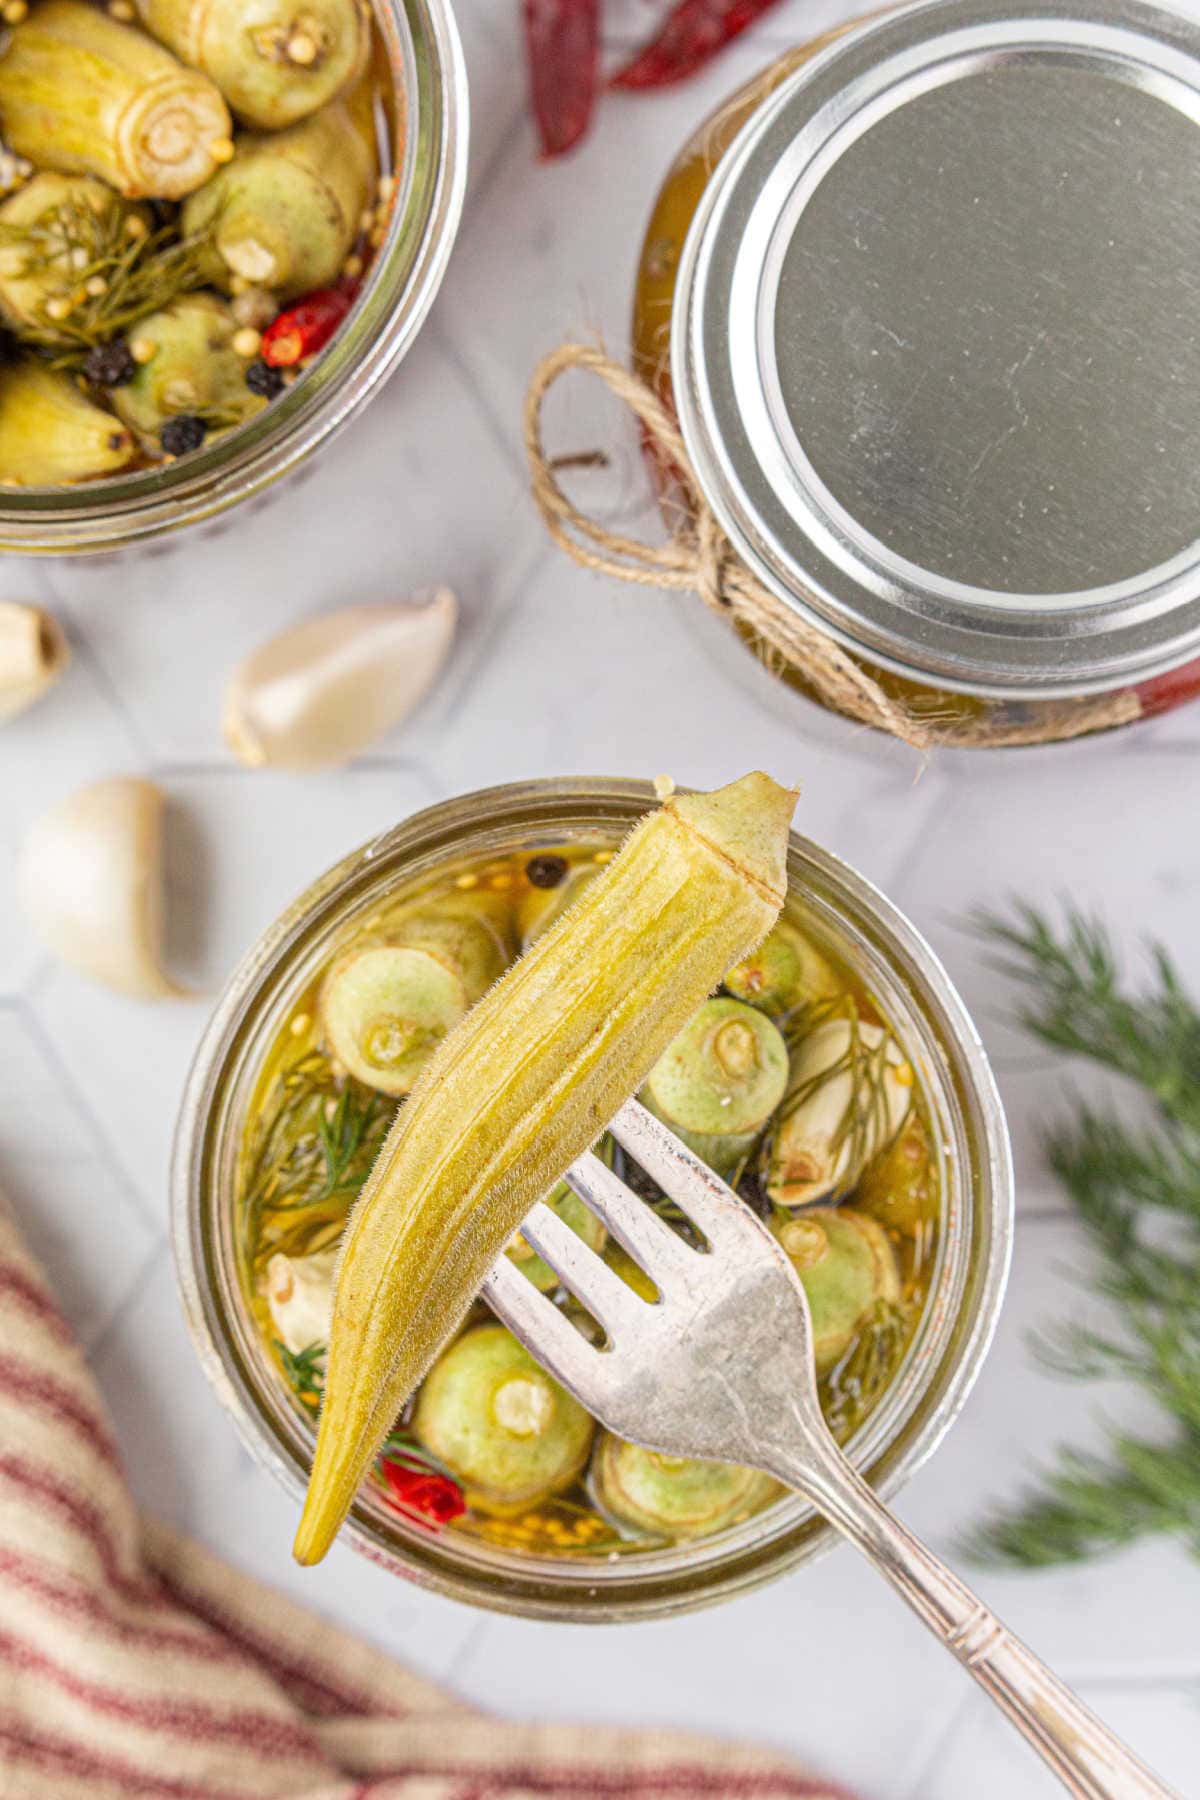 A fork spearing s pod of pickled okra out of the jar.